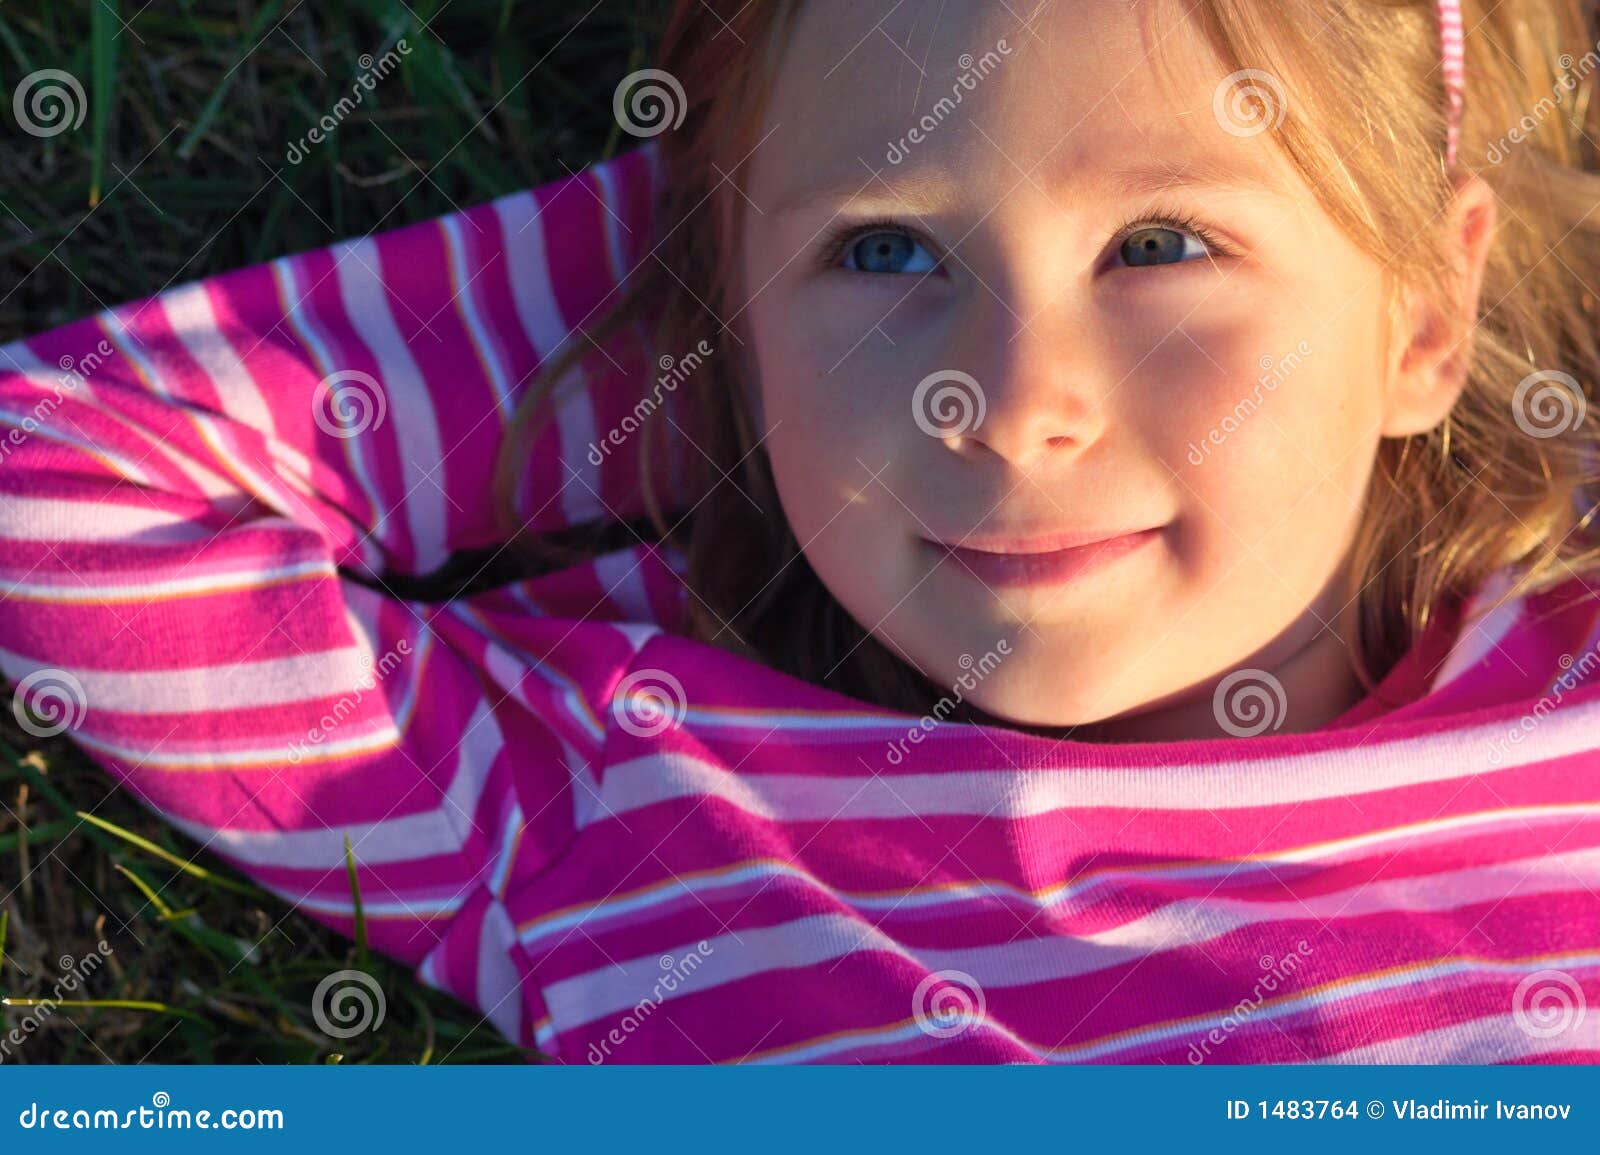 Dreaming little girl stock photo. Image of grass, green - 1483764